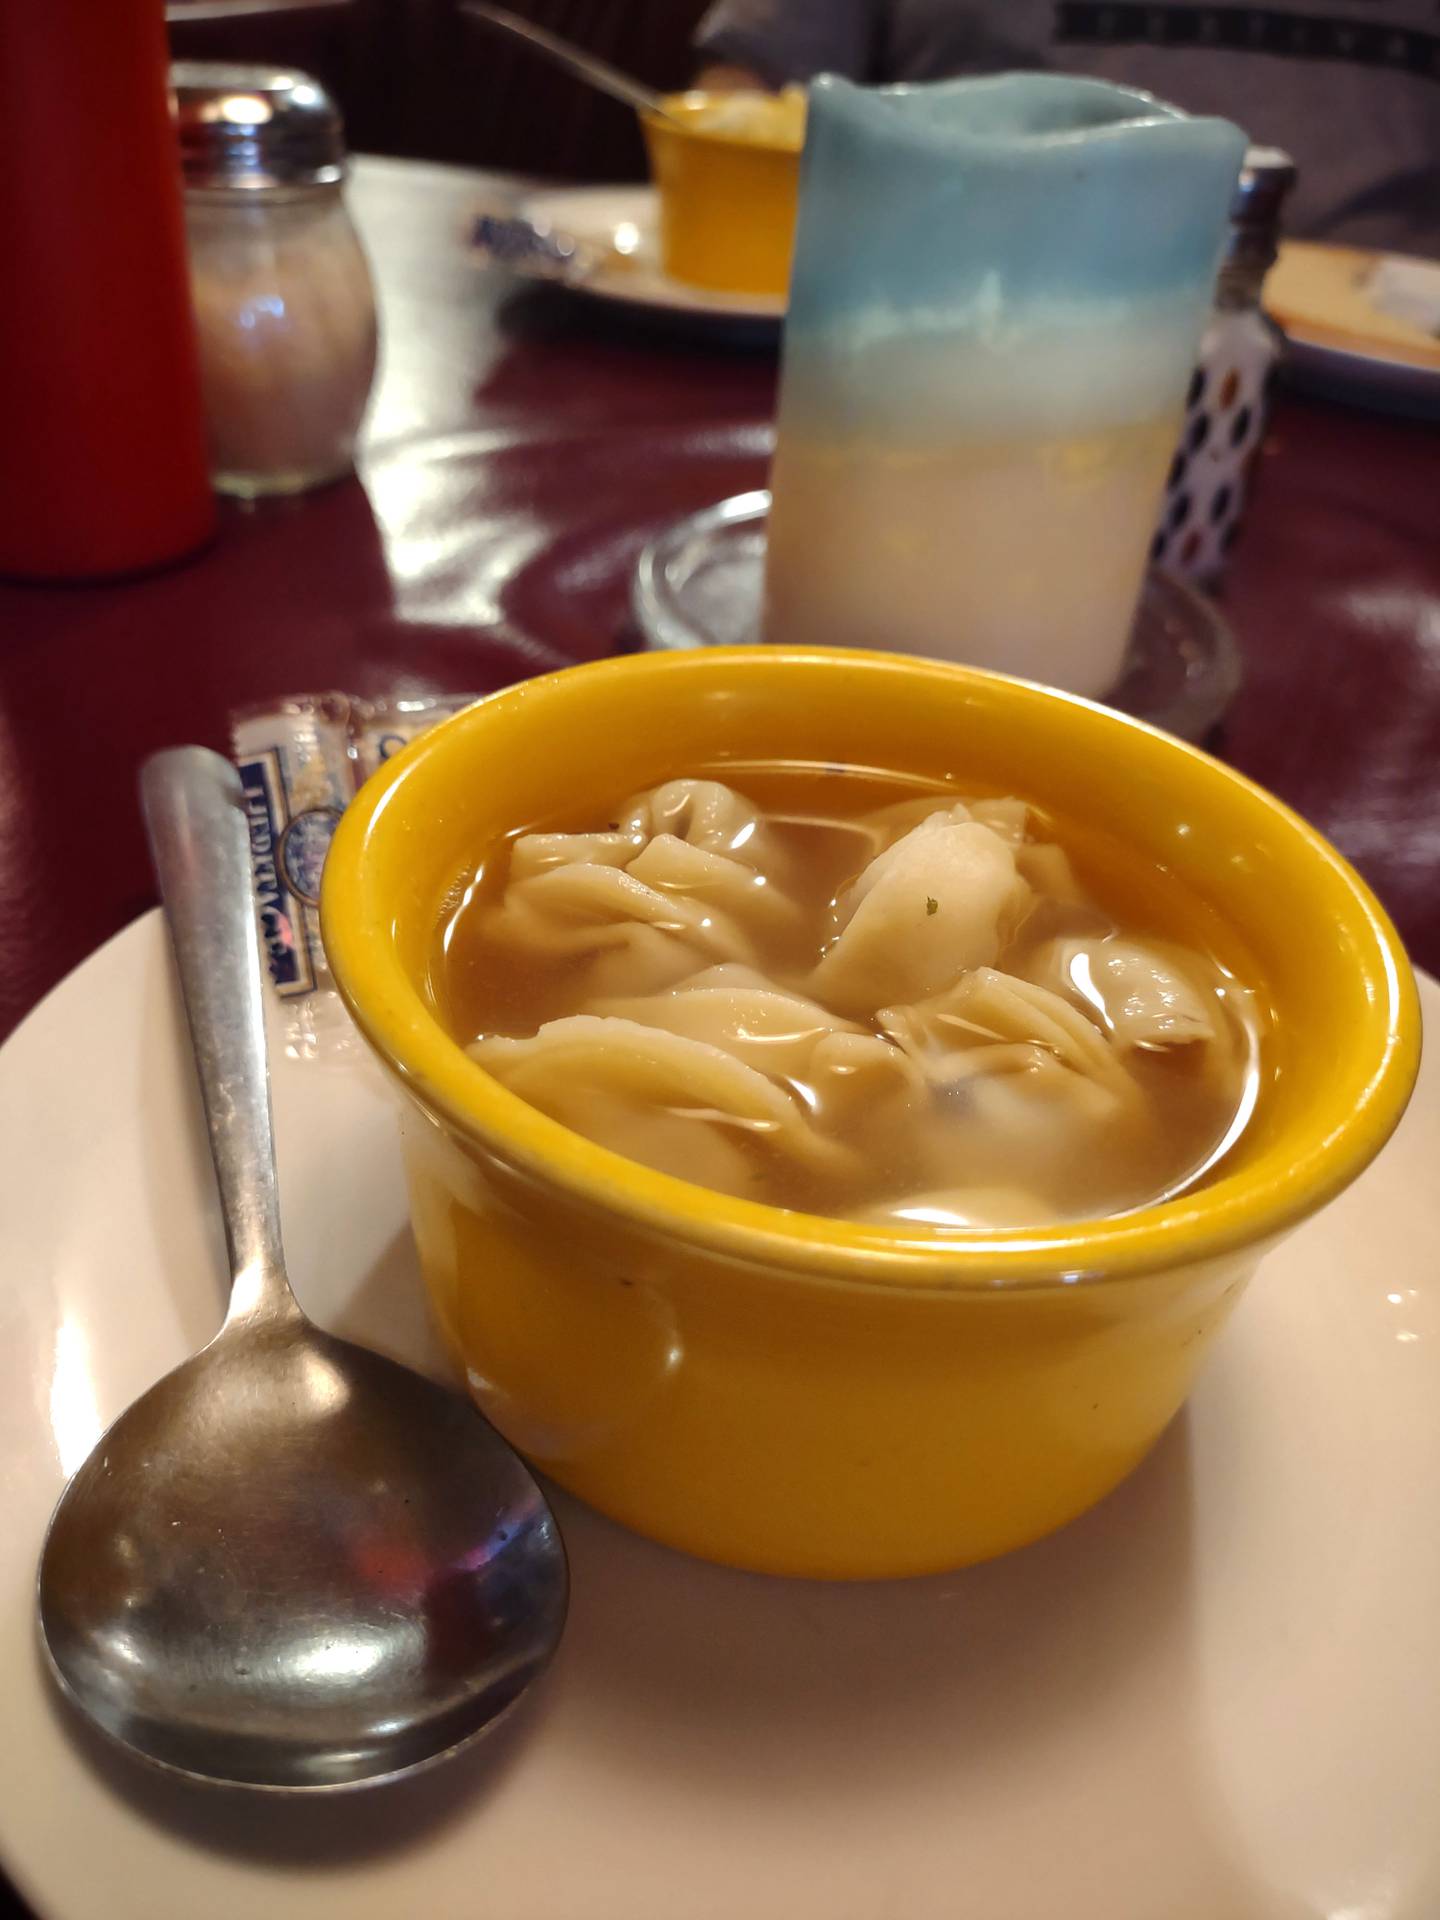 Tortellini in broth is one of the regular soup options on the appetizer menu at Softails Bar and Grill in Ladd.